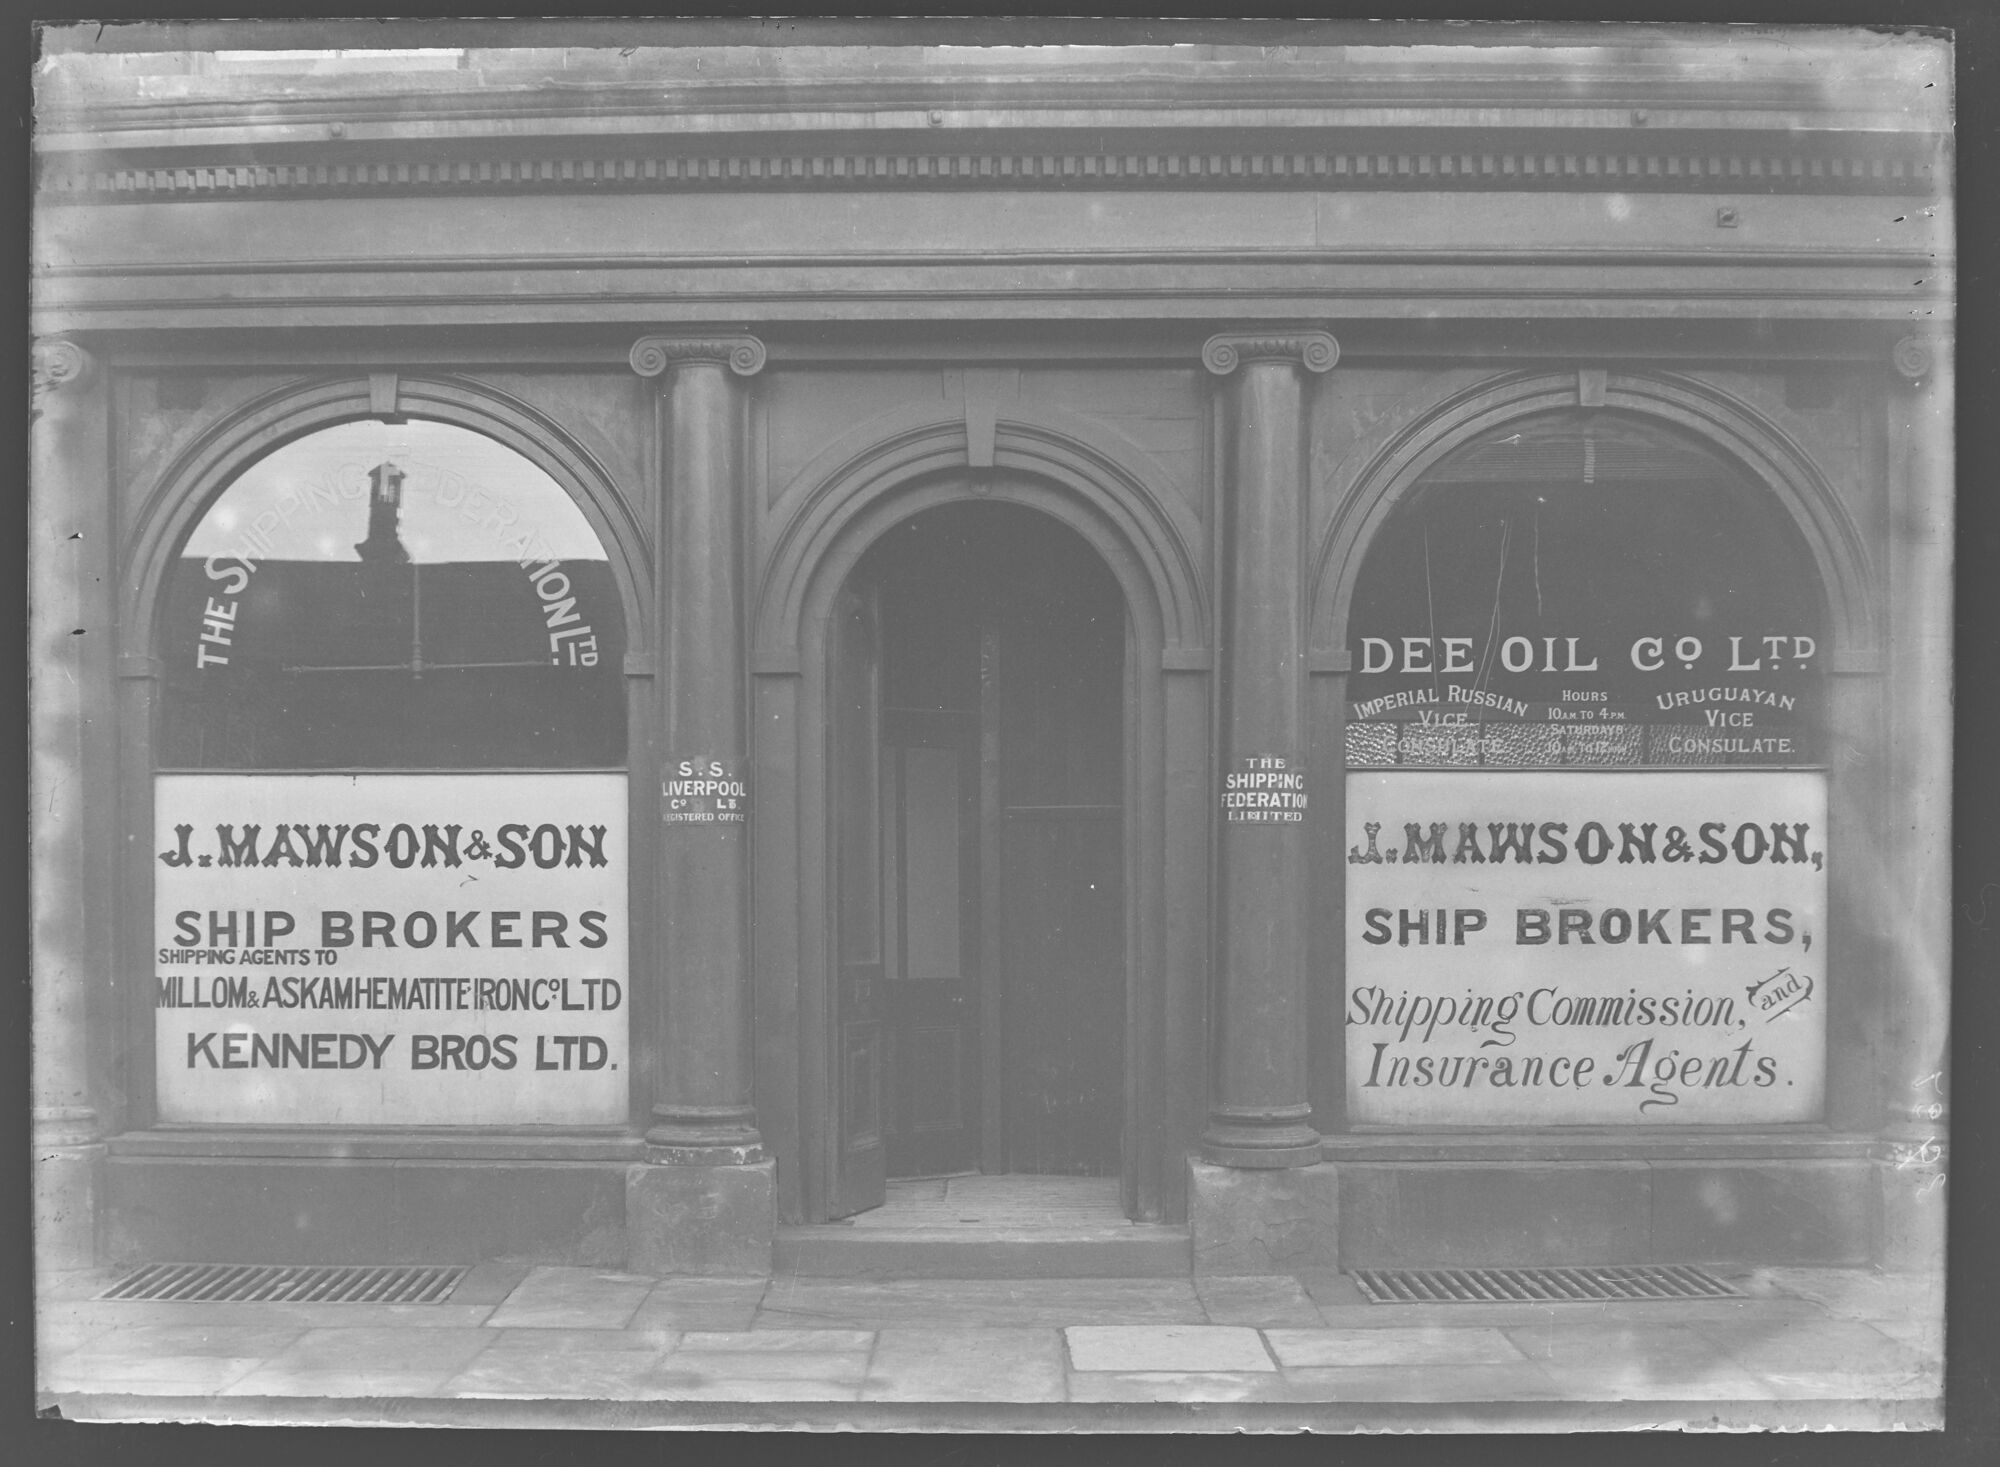 J Mawson & Son, Ship Brokers Offices, Barrow-in-Furness